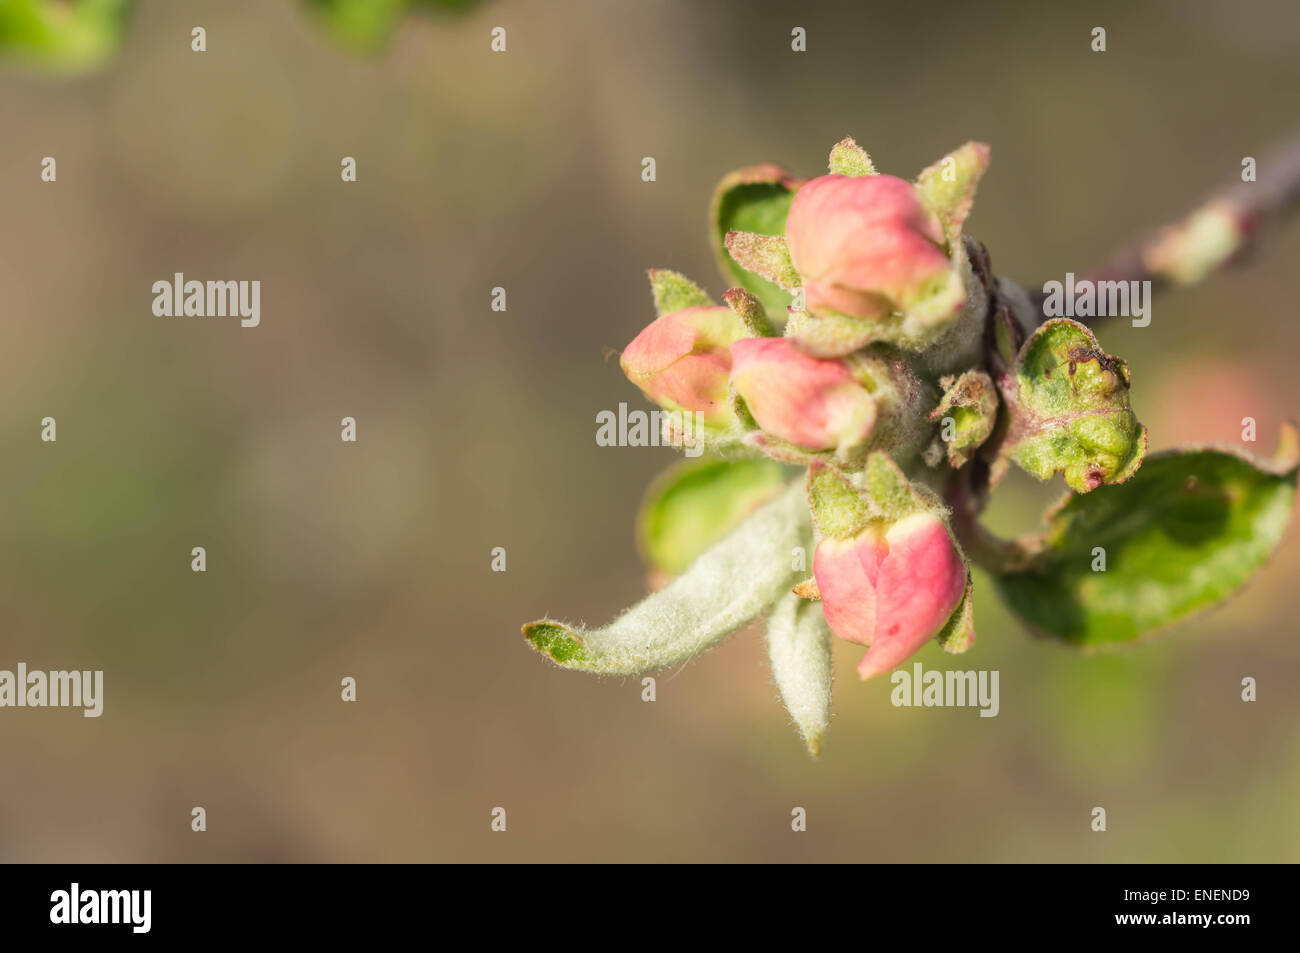 Buds of flowers on an apple-tree close up Stock Photo